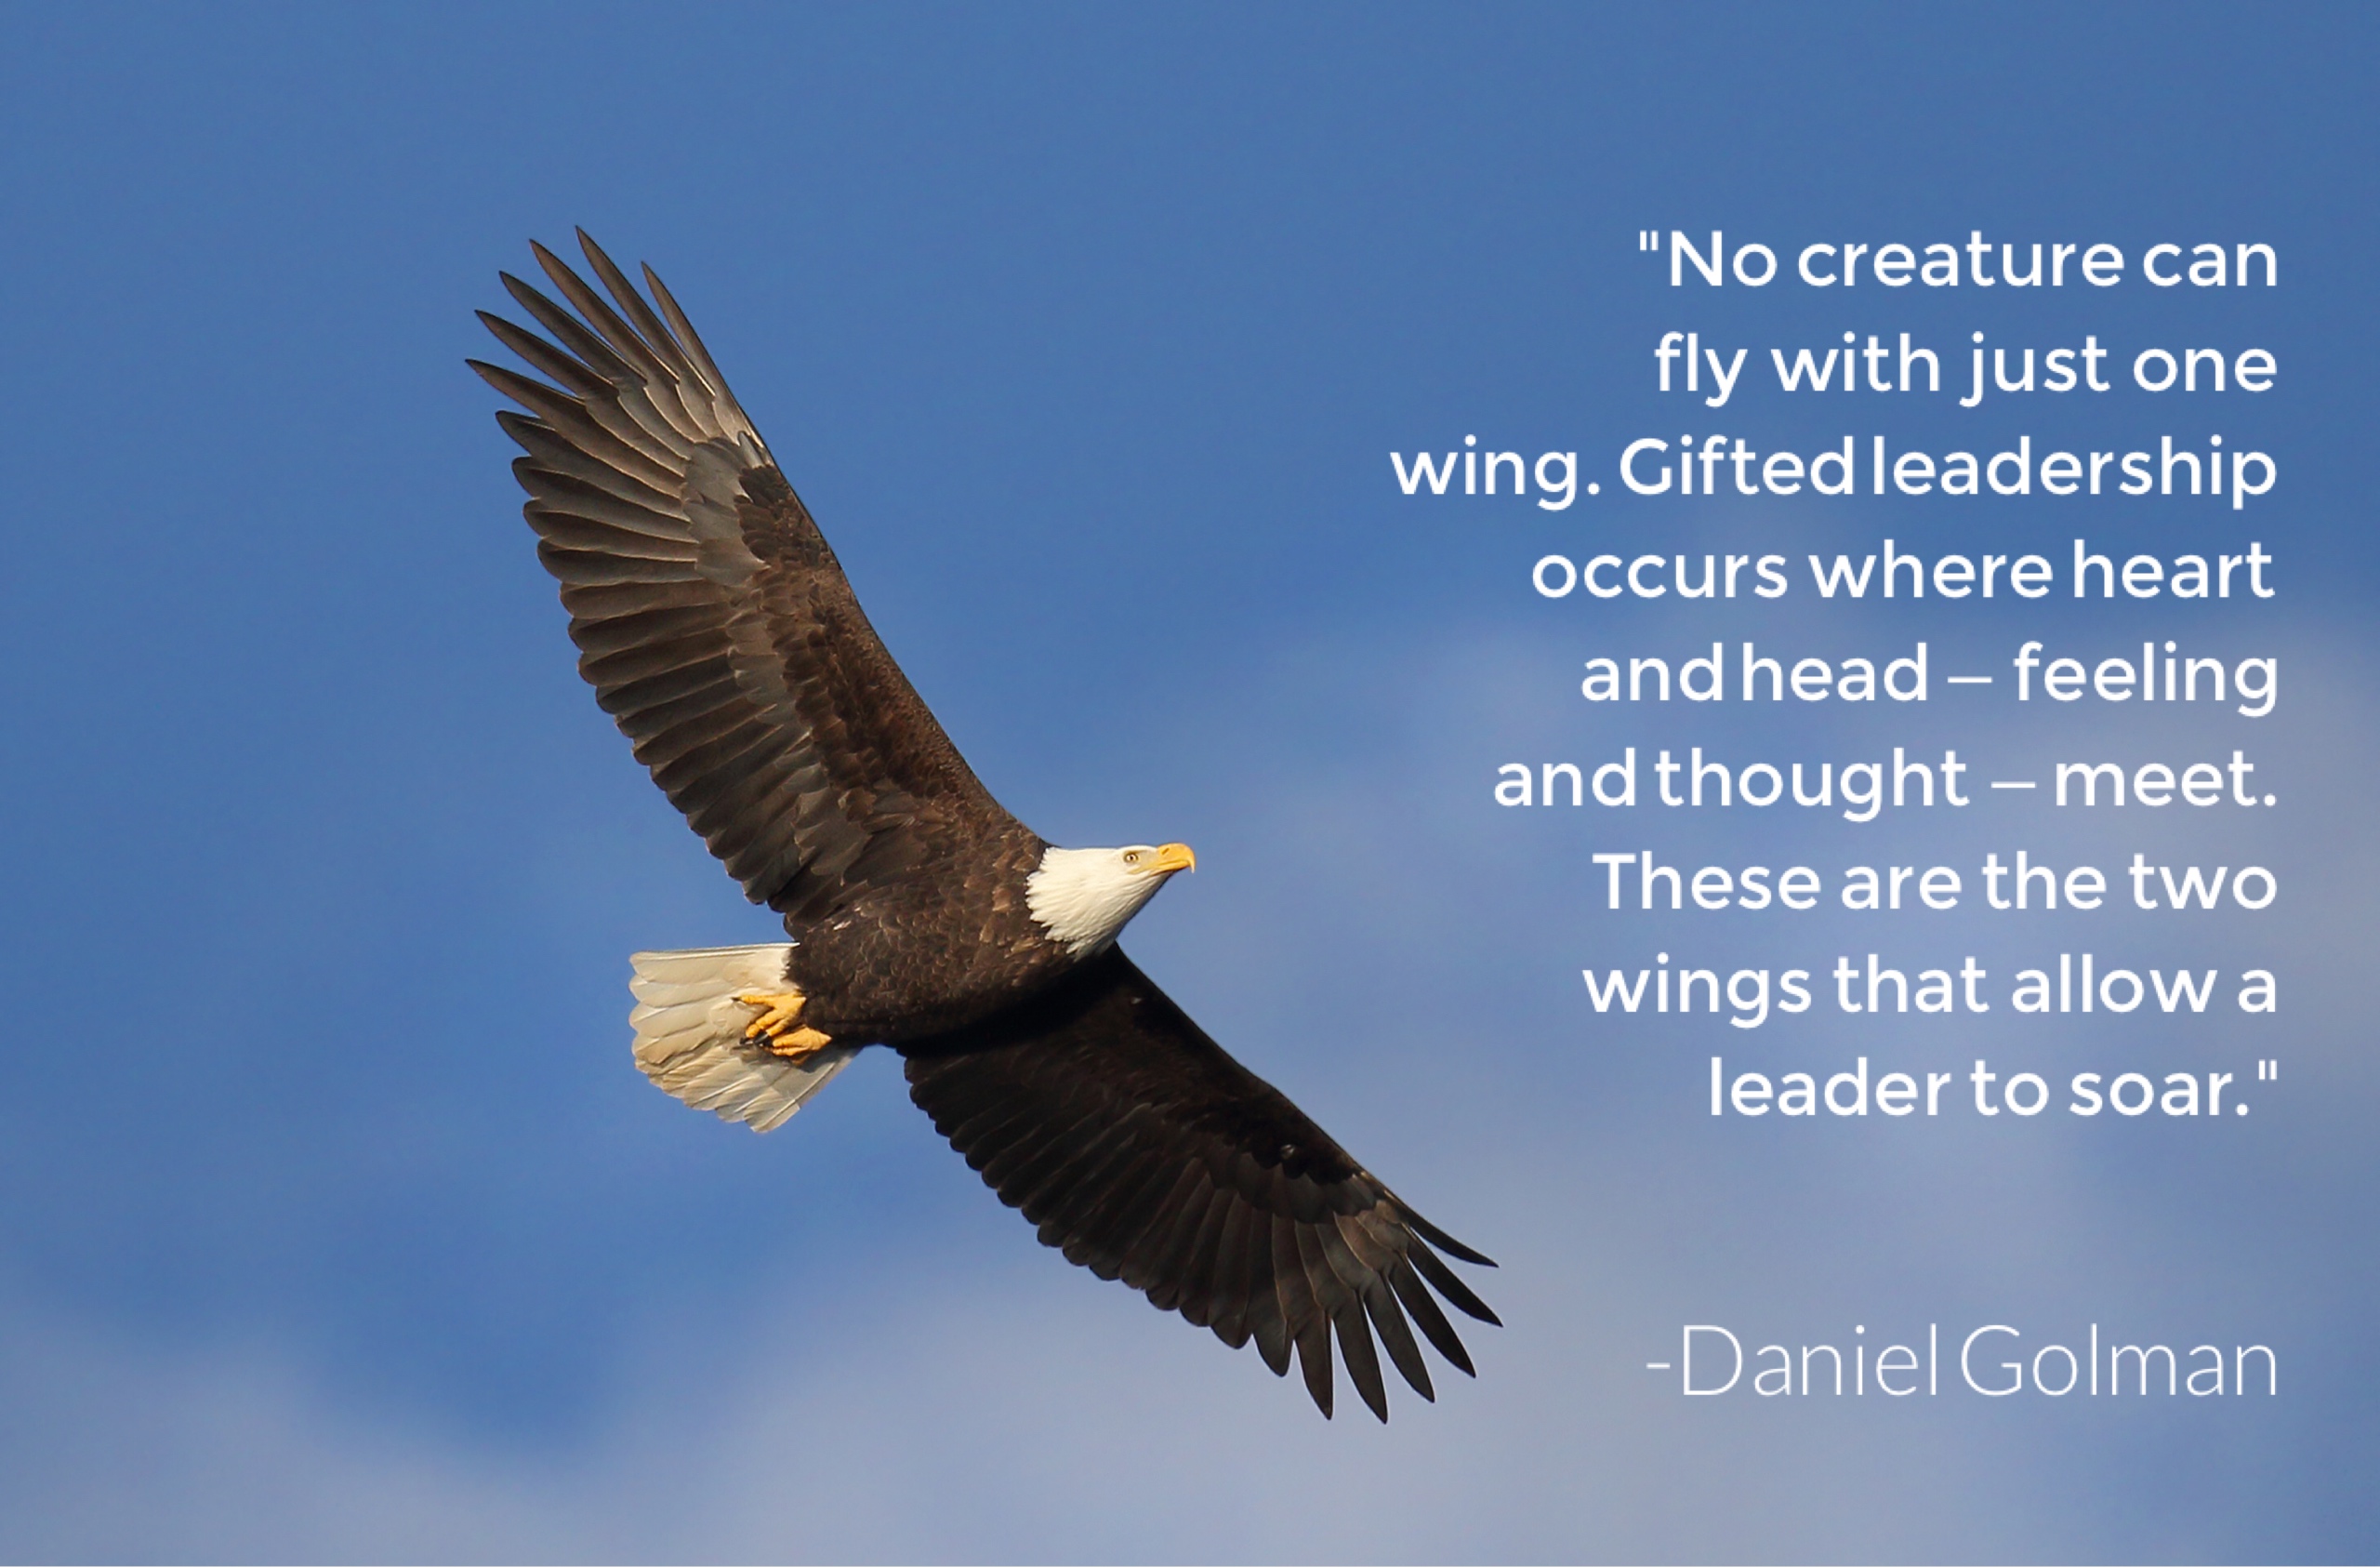 No creature can fly with just one wing. Gifted leadership occurs with the heart and the head – feeling and thought – meet. These are the two wings that allow a leader to soar. Daniel Goleman.